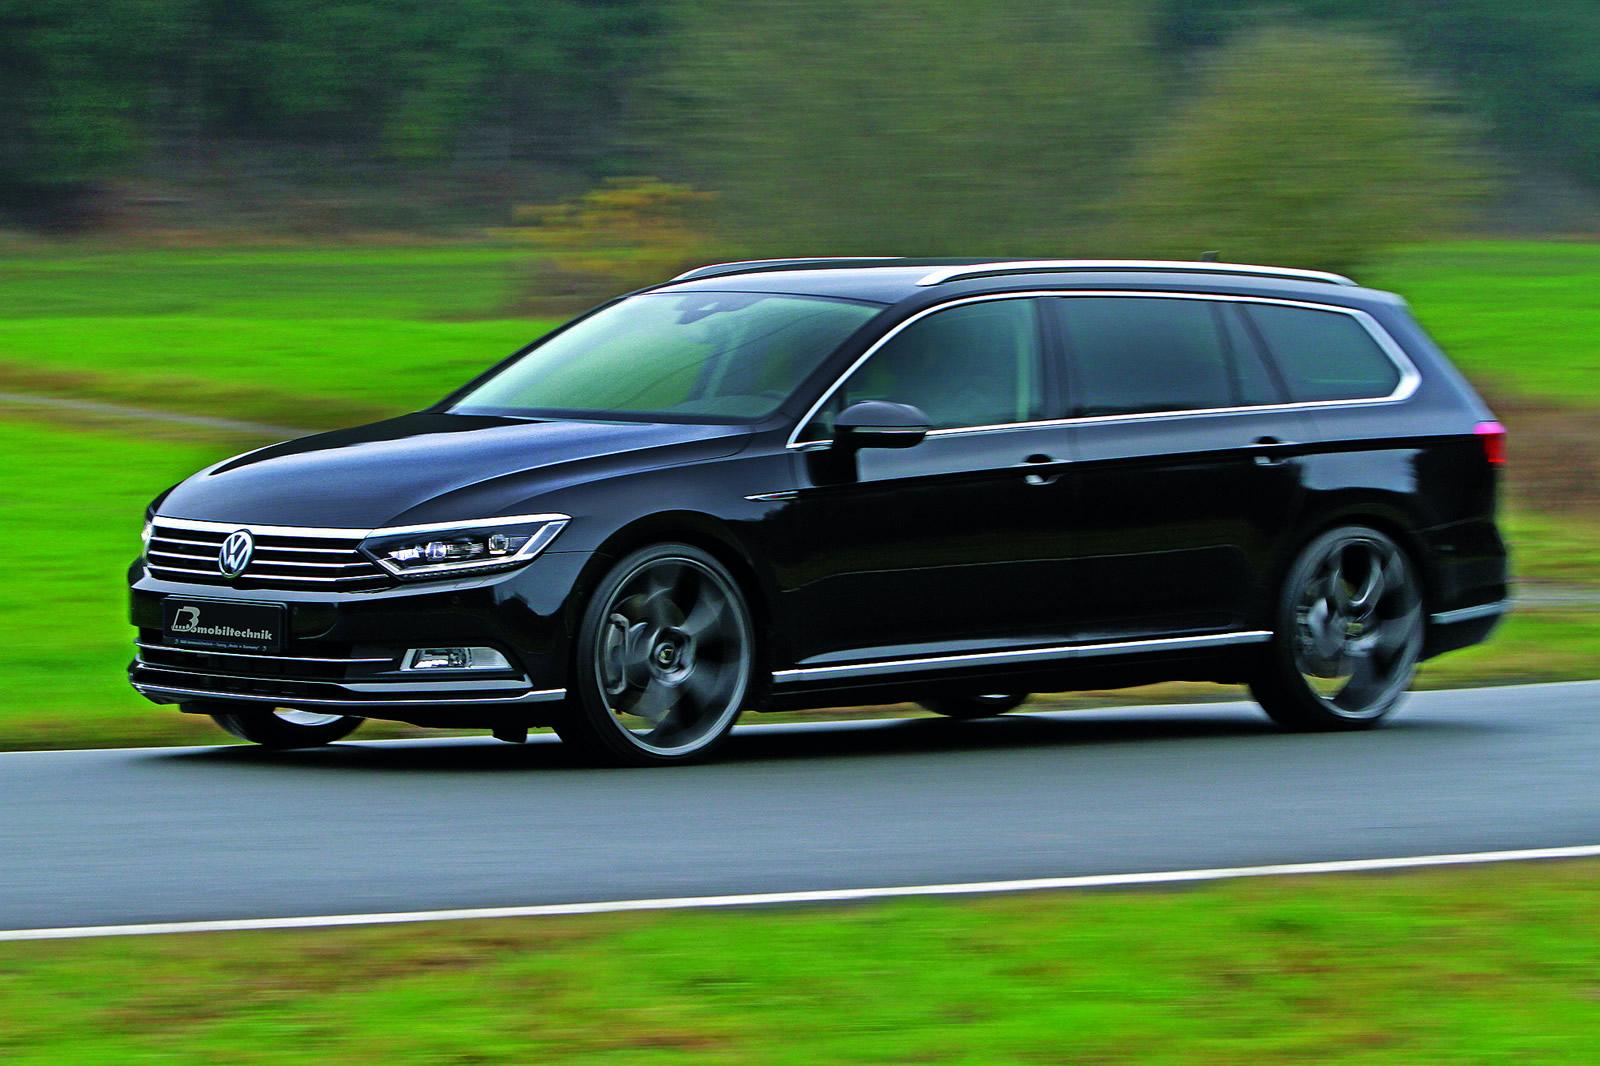 B&B Injects into VW Variant 2.0 BiTDI | Carscoops